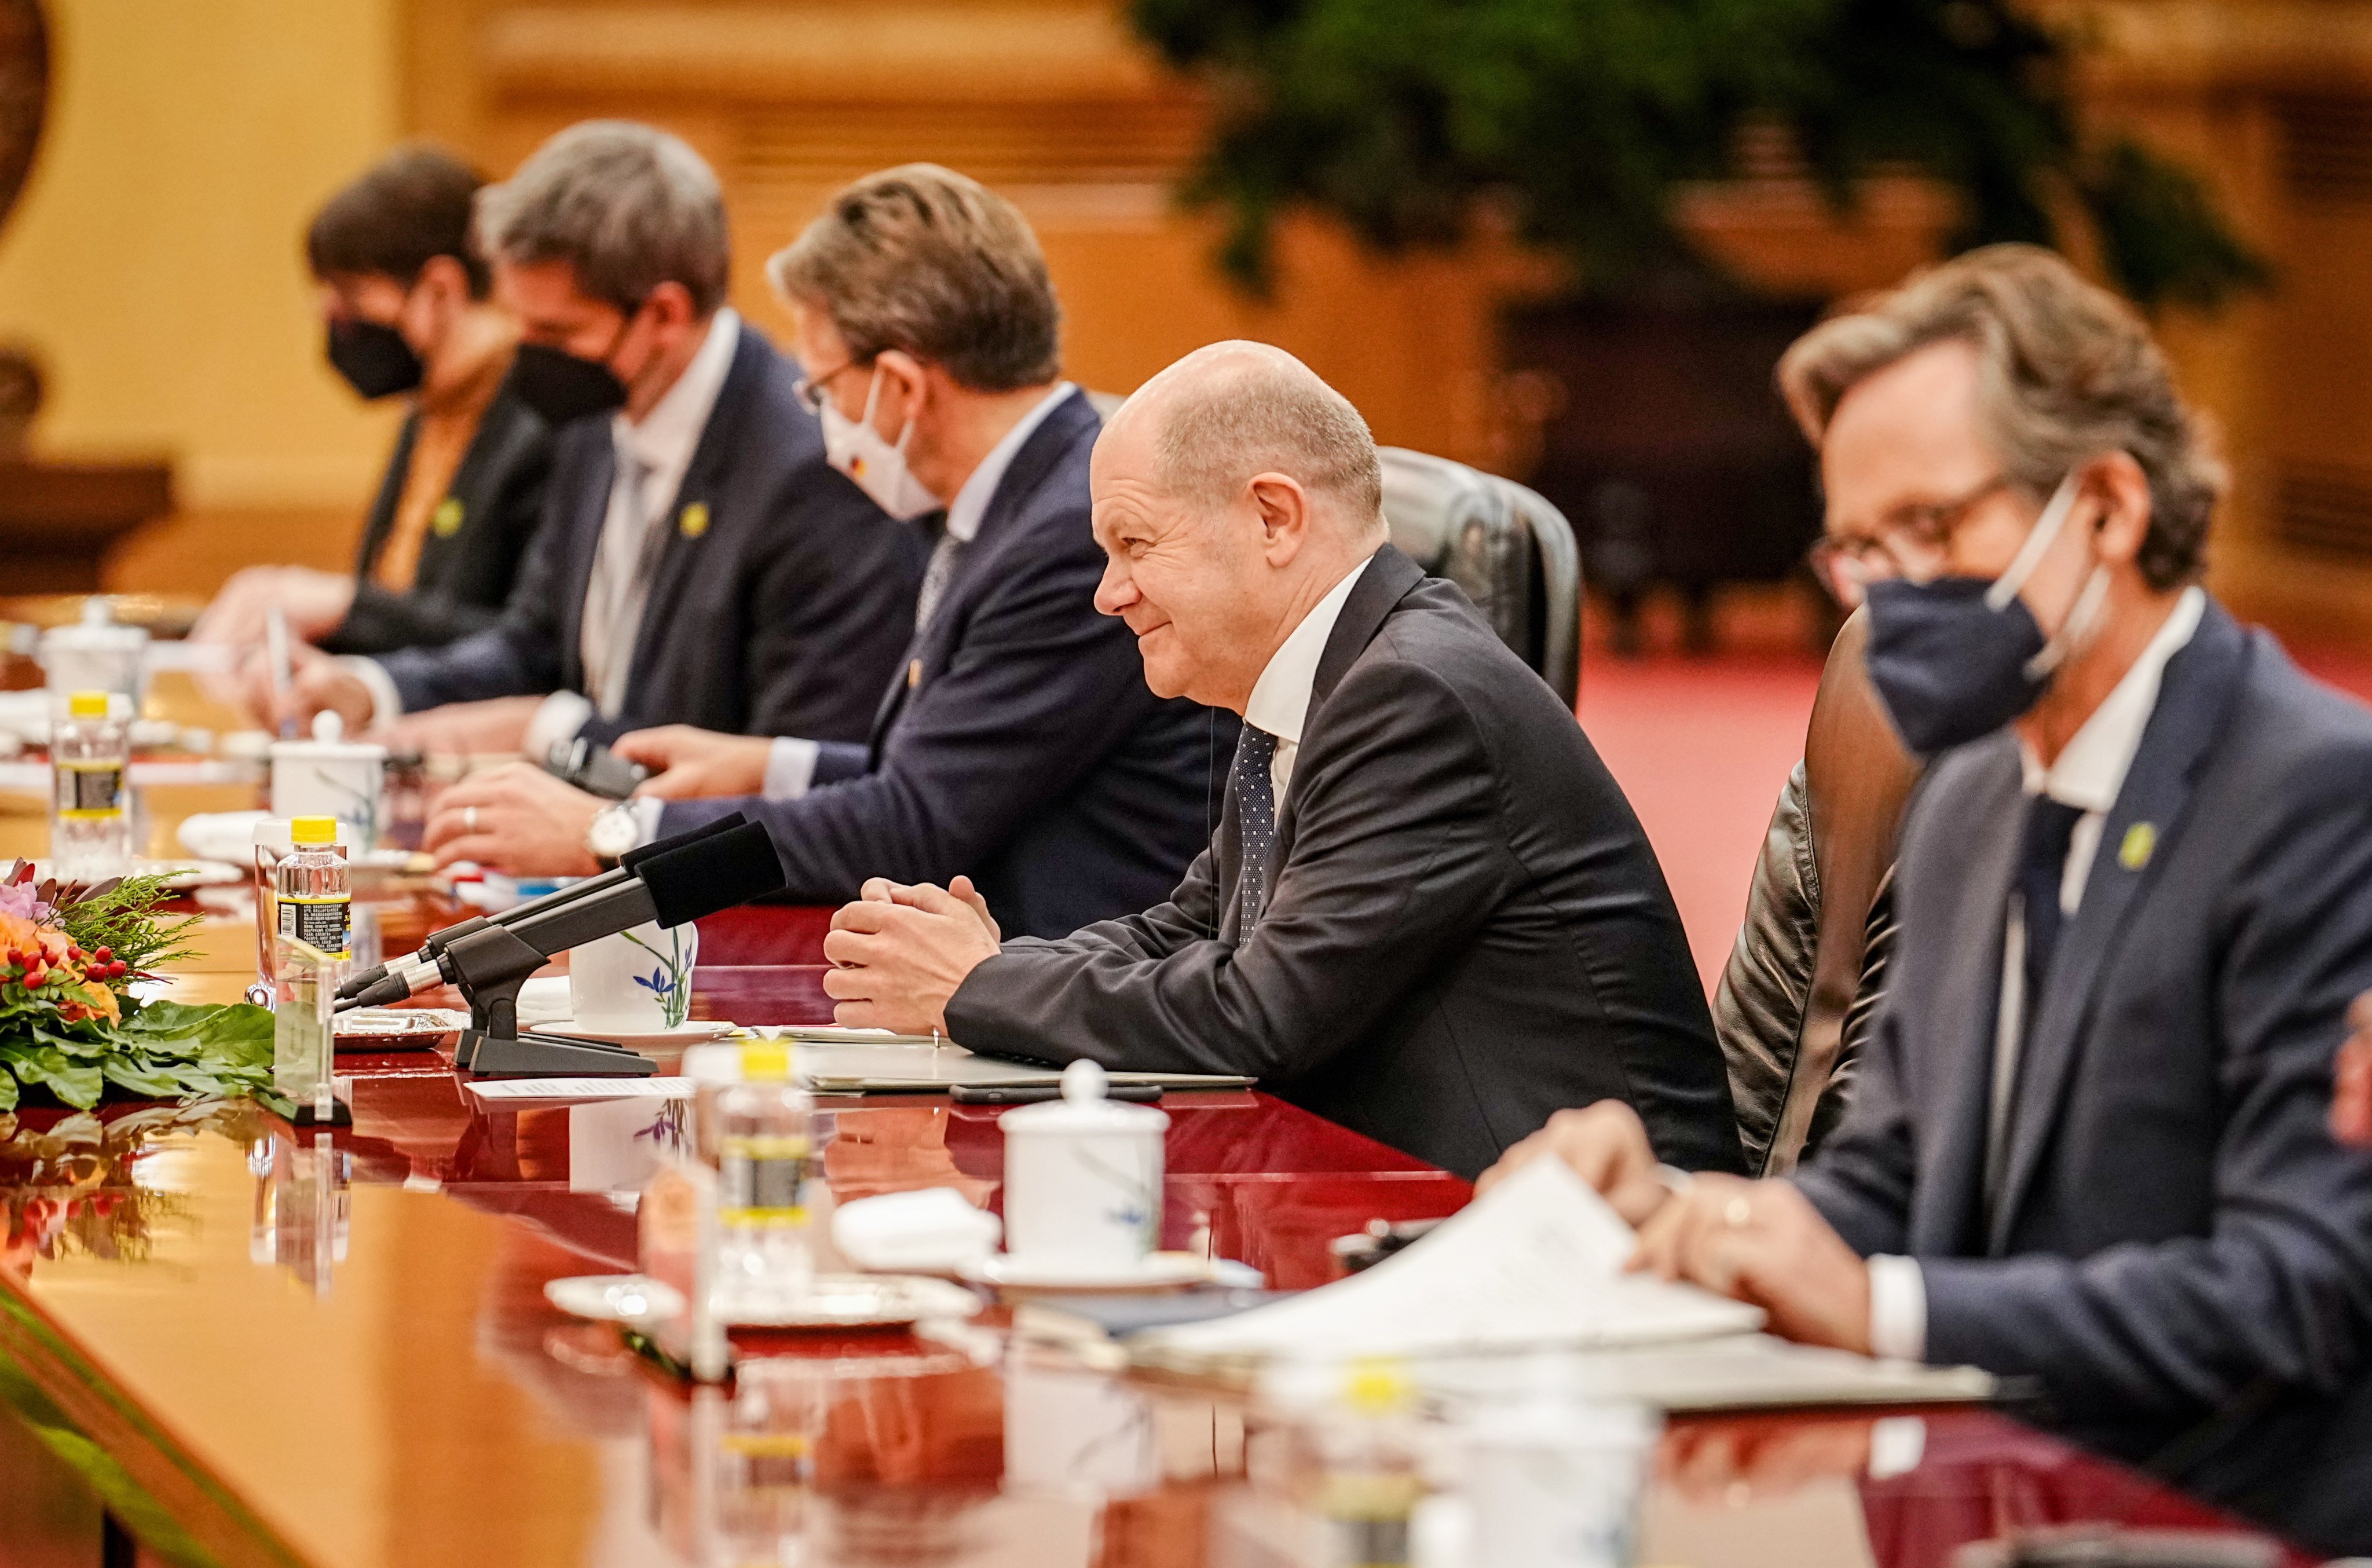 German Chancellor Olaf Scholz (second from right) during a meeting at the Great Hall of the People in Beijing on November 4. Photo: EPA-EFE